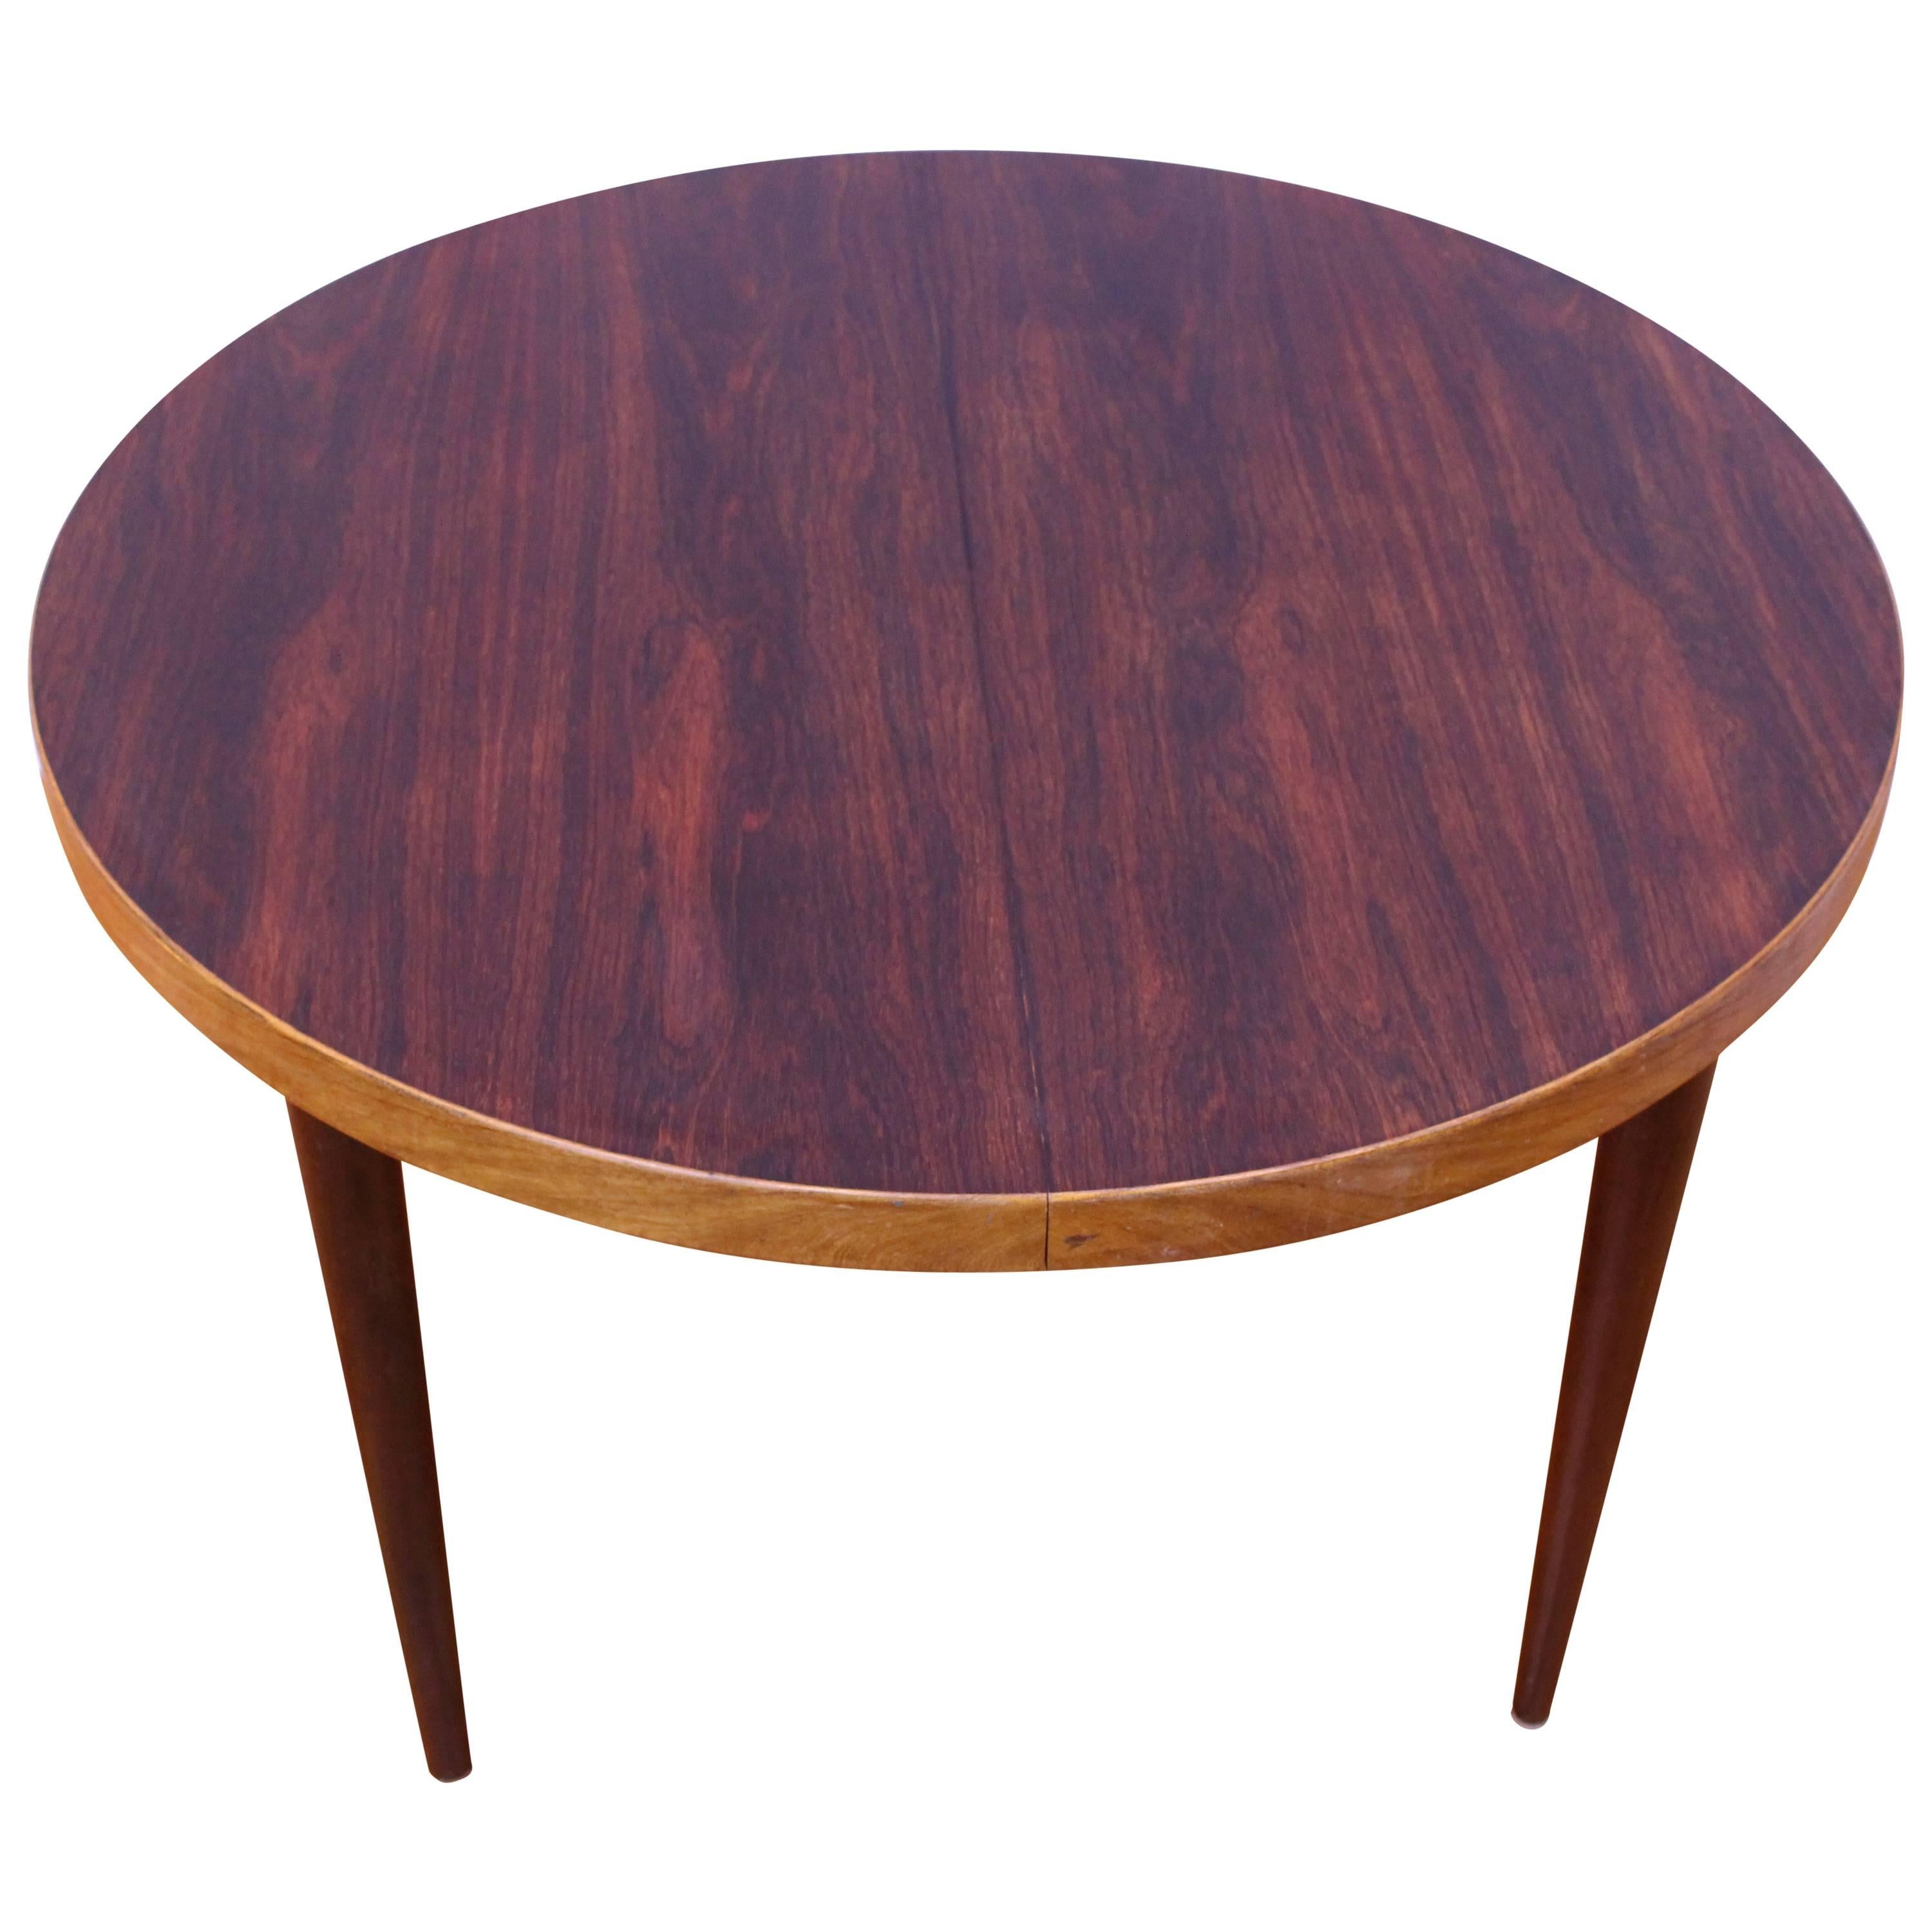 Danish, Mid-Century Modern Rosewood and Teak Dining Table by Kai Kristiansen For Sale